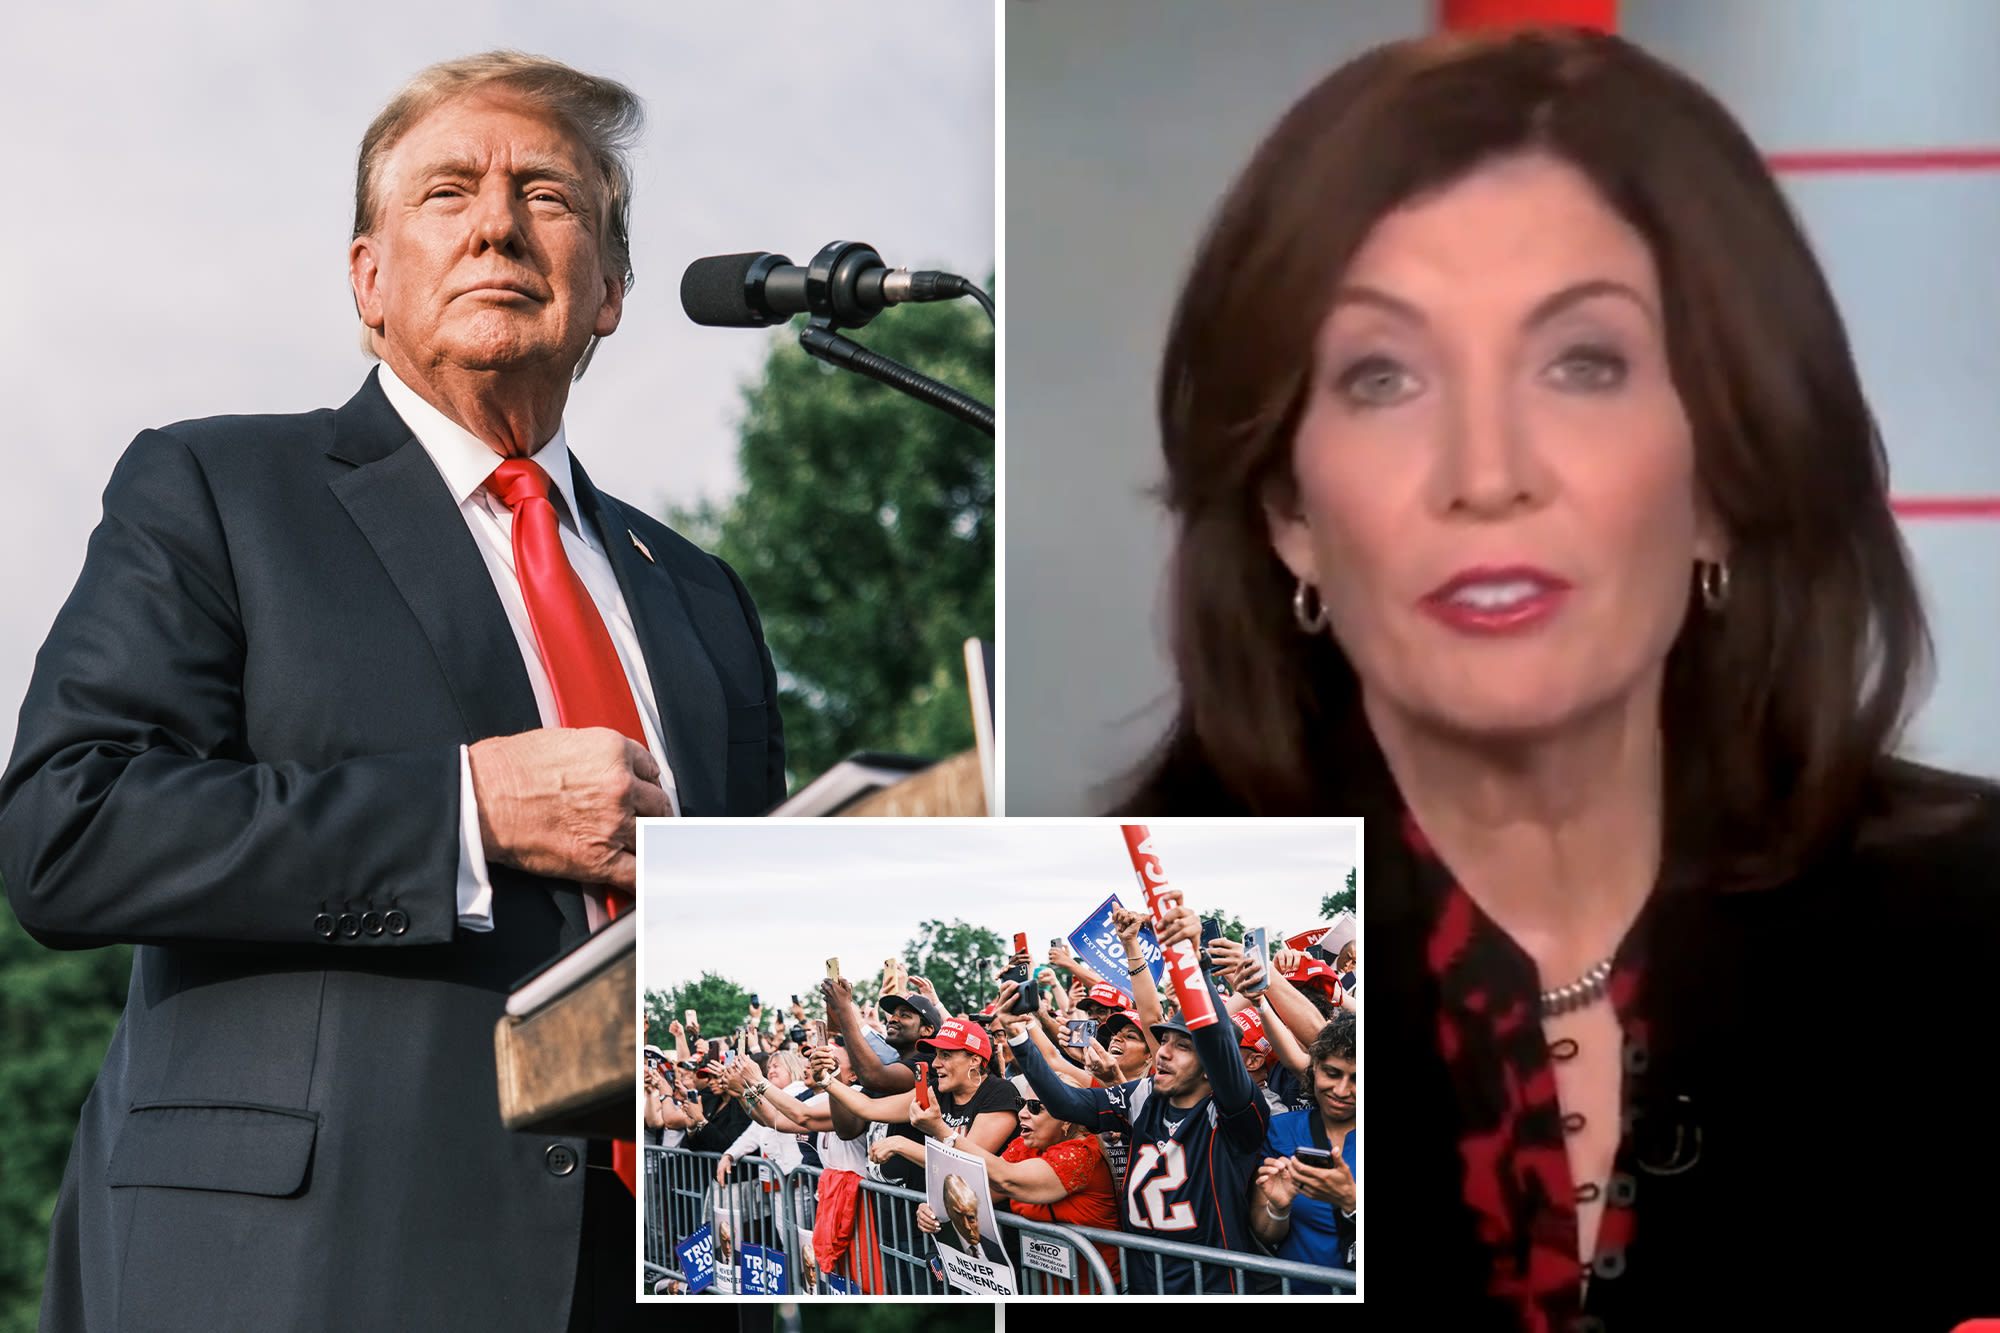 Gov. Kathy Hochul slammed for calling Trump’s NY supporters ‘clowns,’ compared to Hillary’s infamous ‘basket of deplorable’s moment